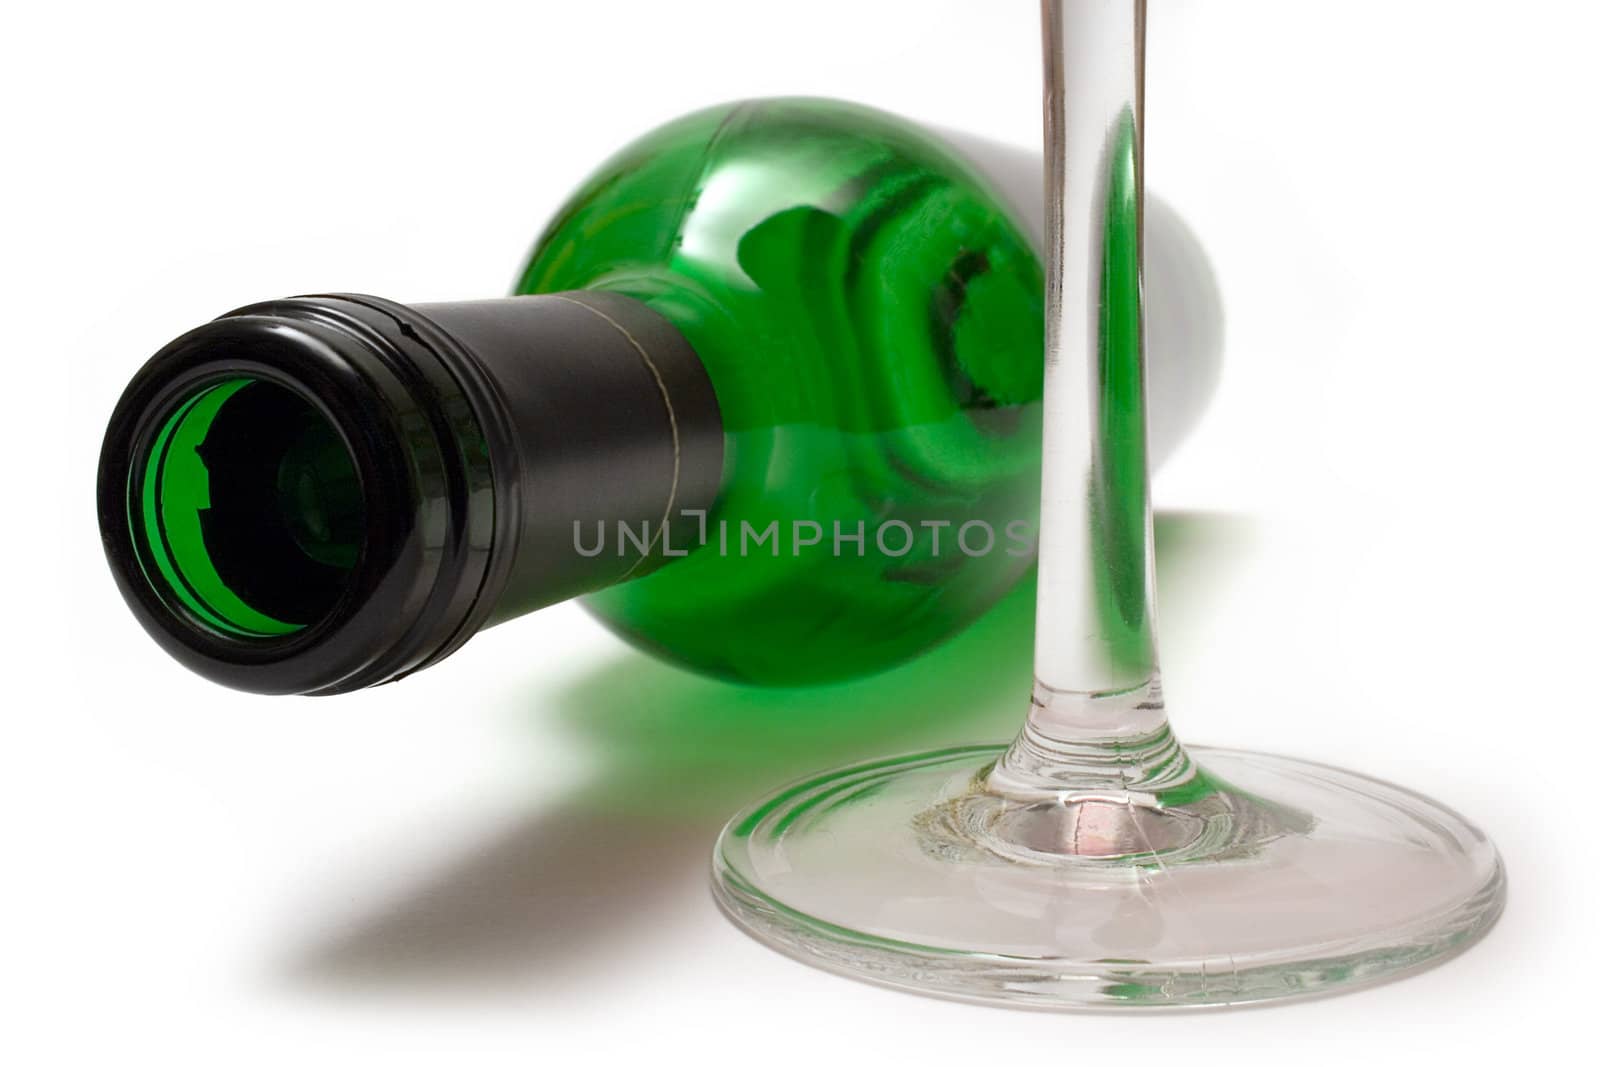 Drinking a bottle of wine. Isolated on a white background.